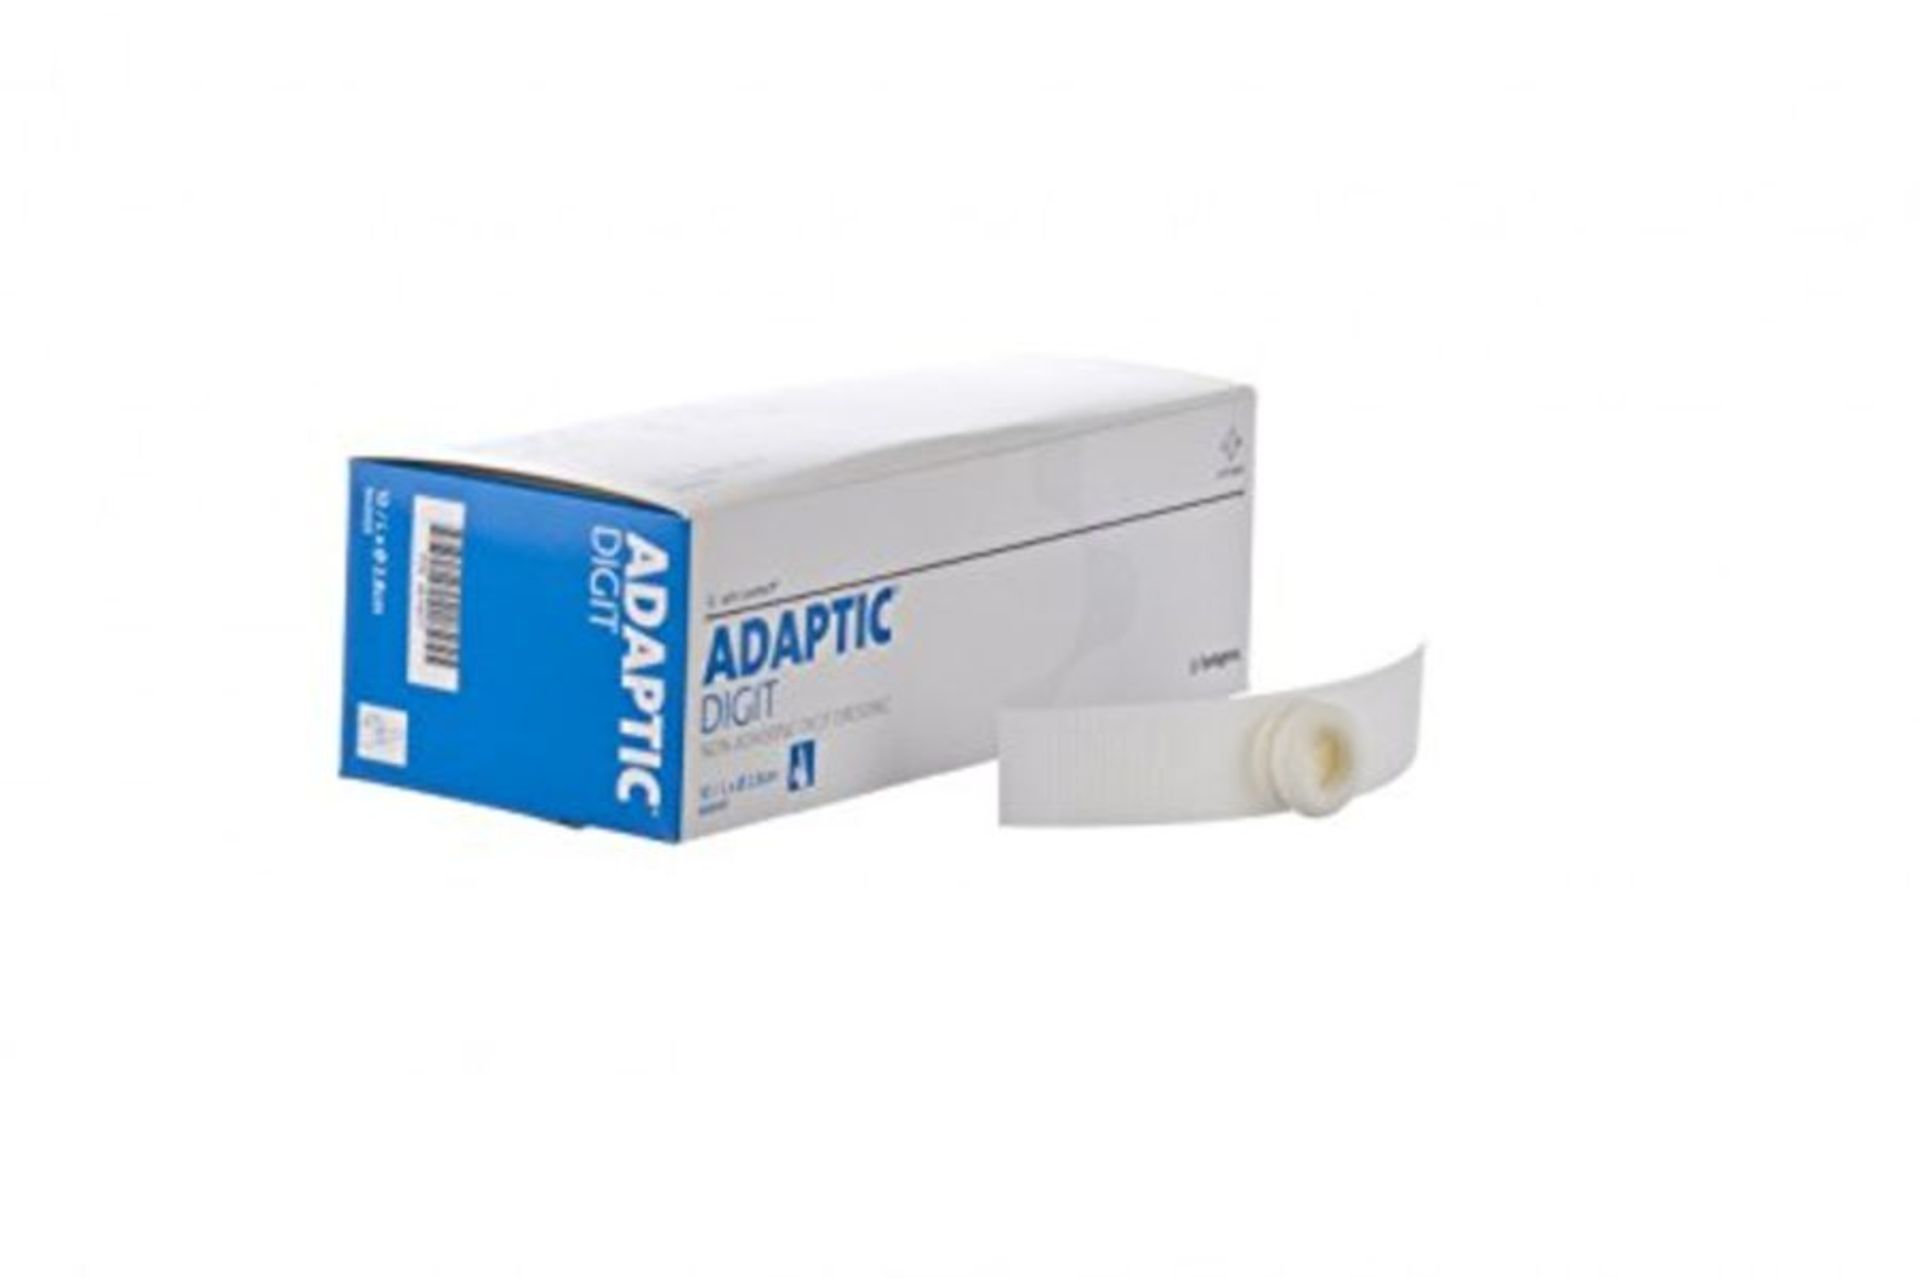 Adaptic E6MAD023 Non-Adhering Digit Dressing, Large, 2.8 cm Length (Pack of 10)